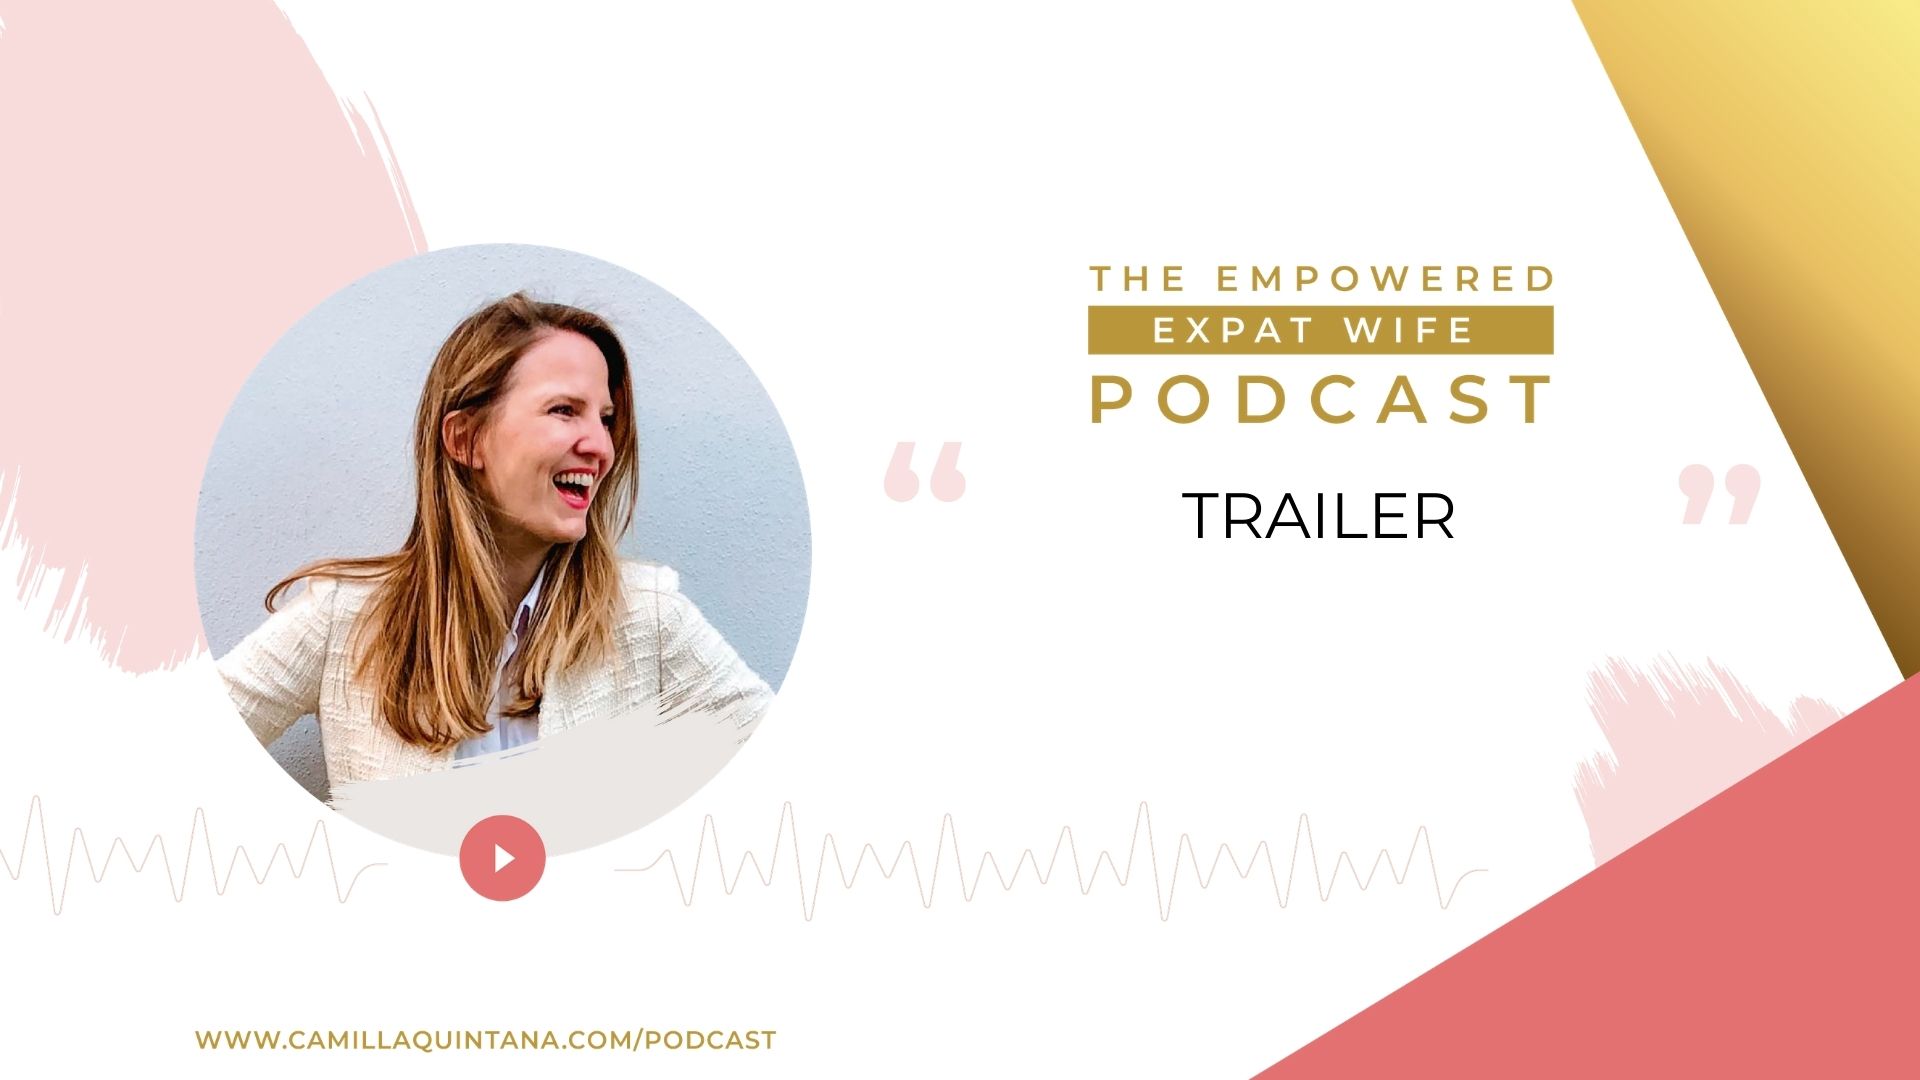 What to expect from THE EMPOWERED EXPAT WIFE PODCAST